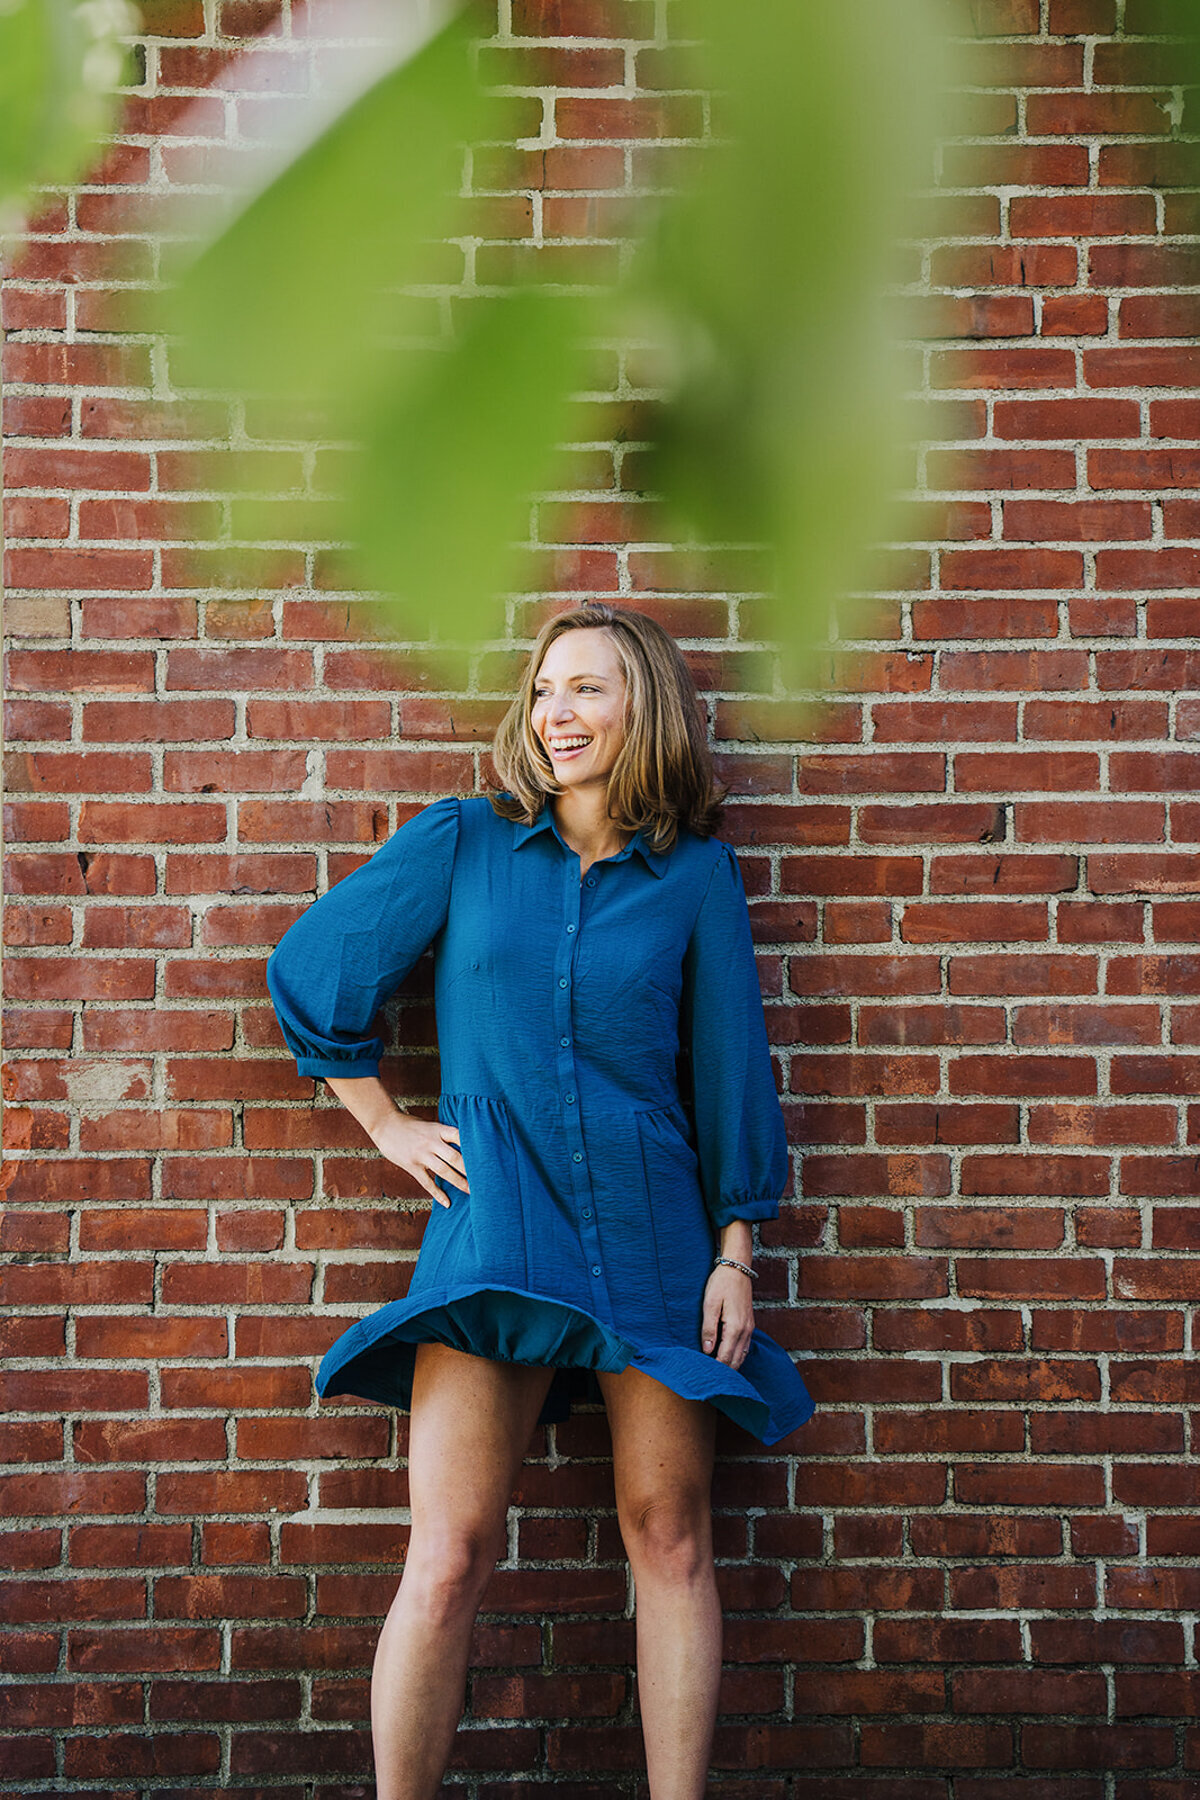 woman in blue dress laughs against a brick wall